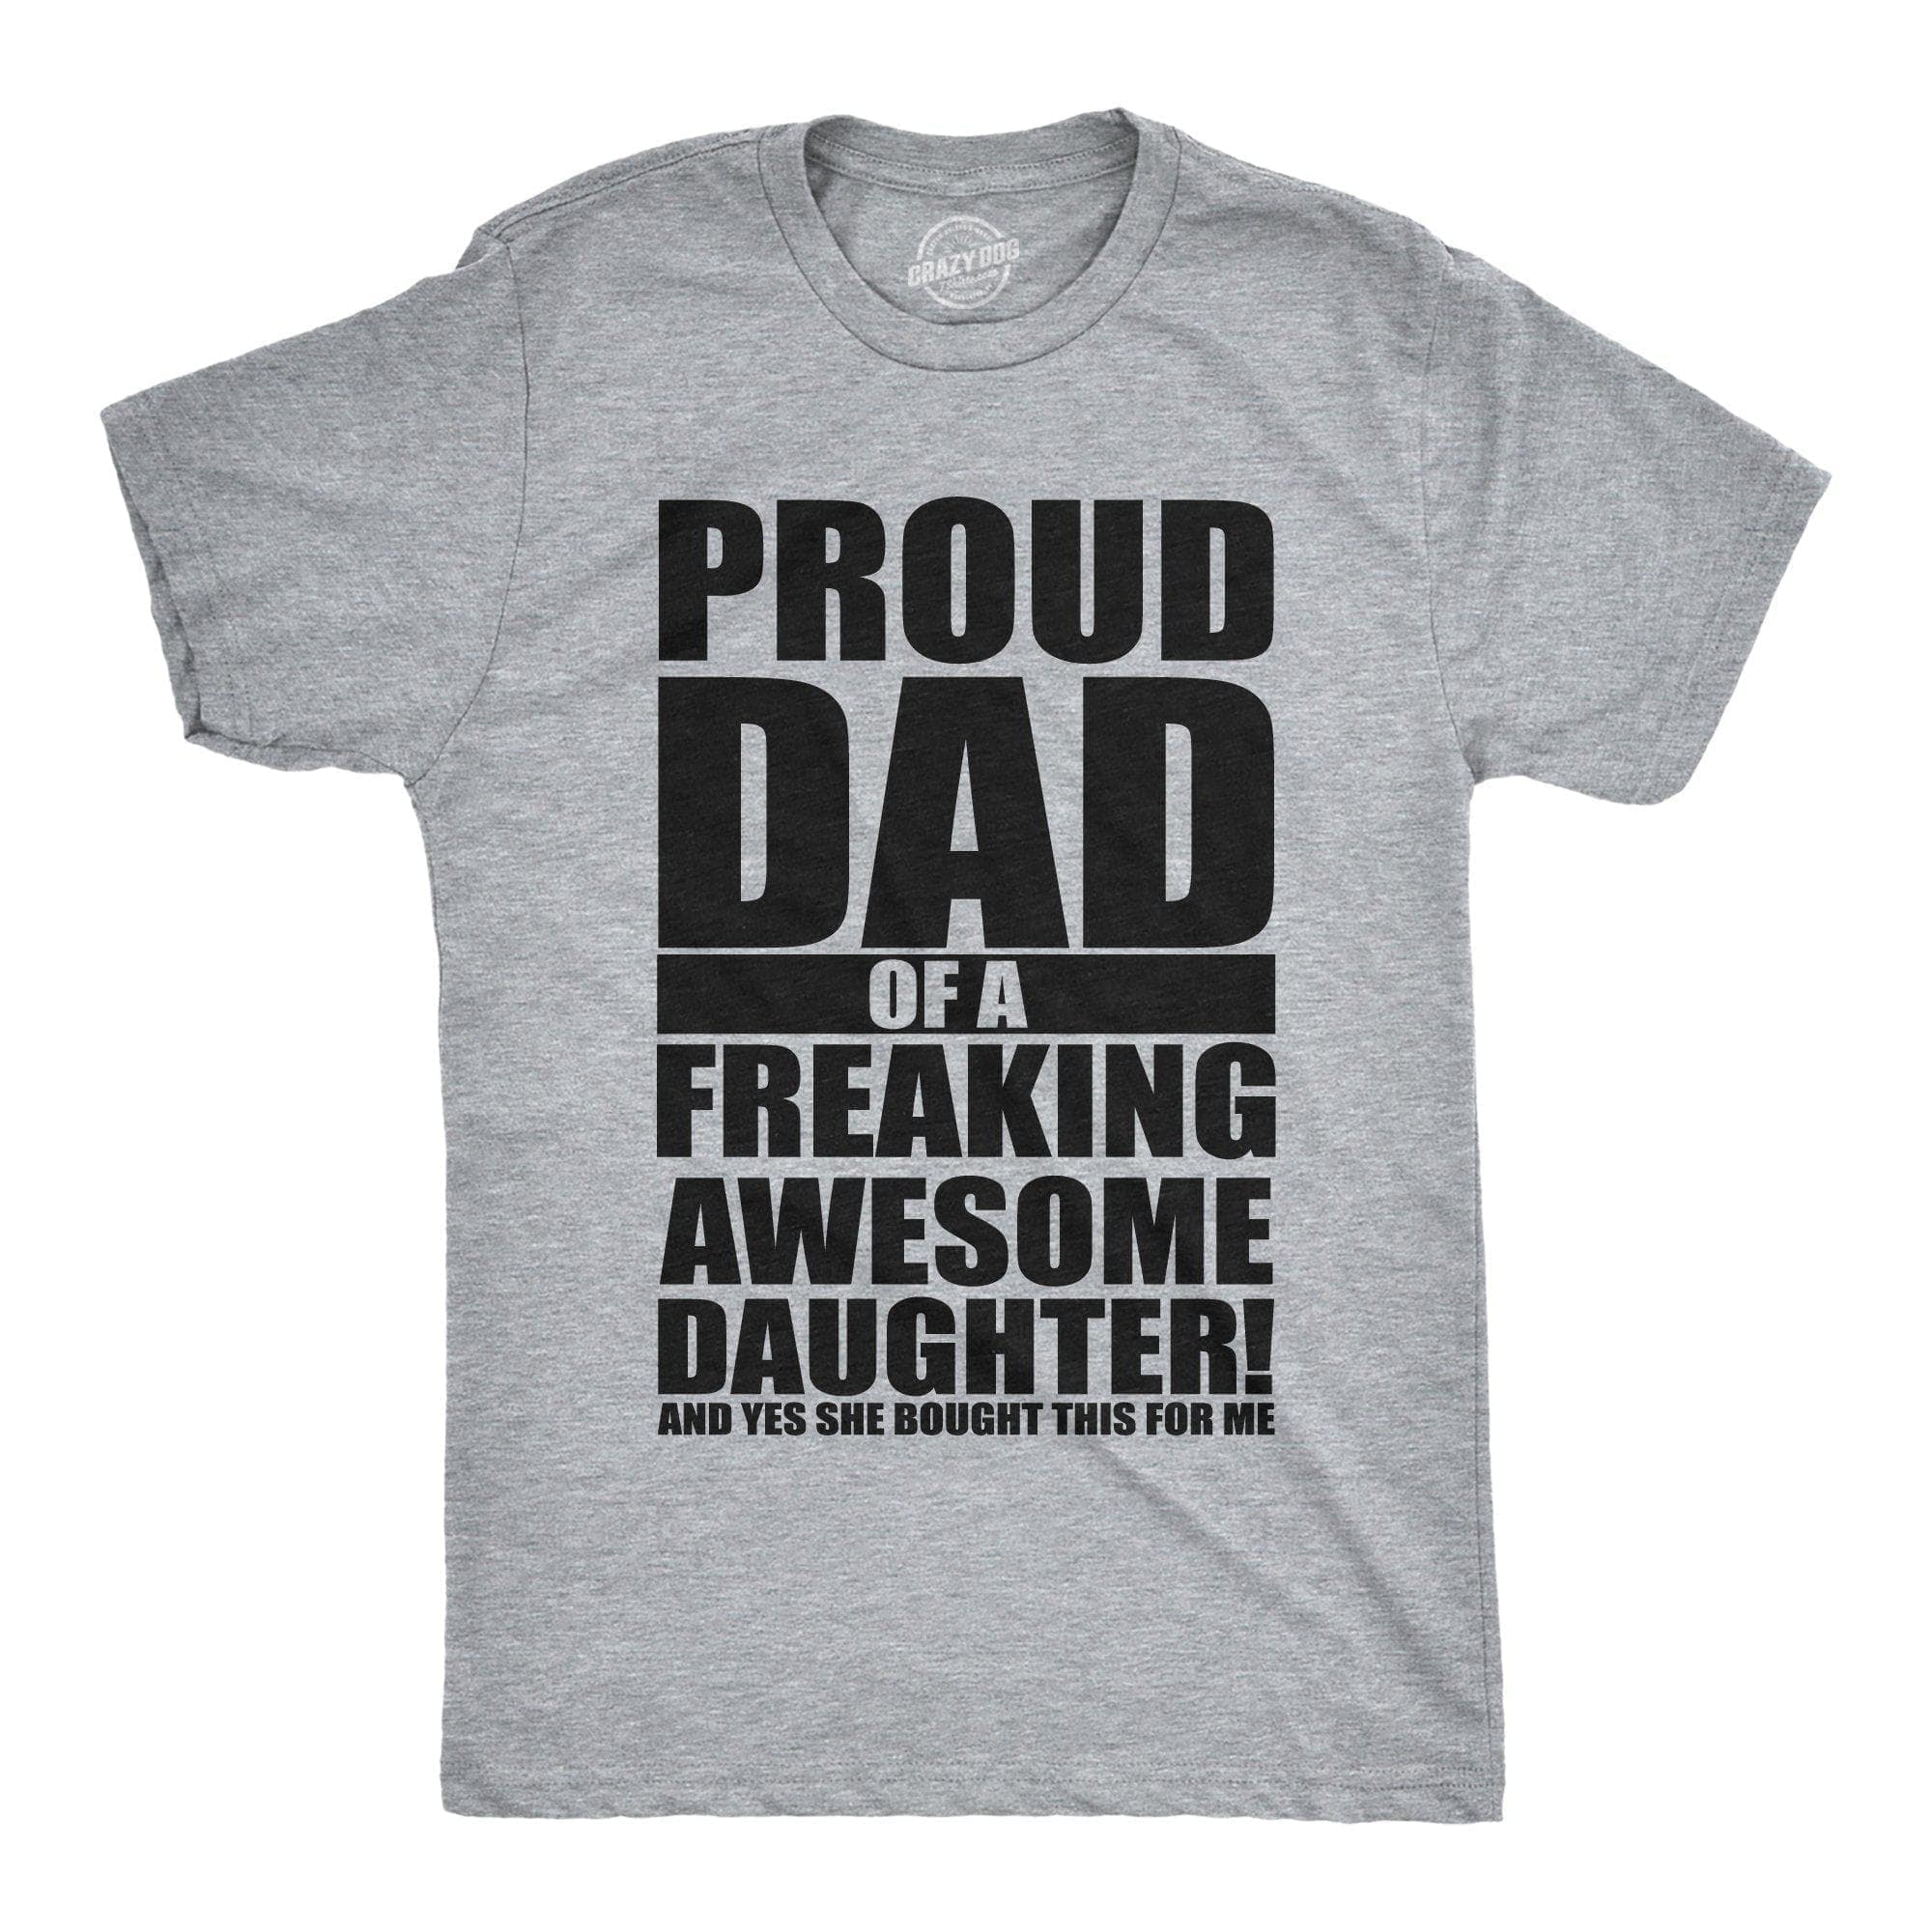 Proud Dad Of A Freaking Awesome Daughter Men's Tshirt  -  Crazy Dog T-Shirts